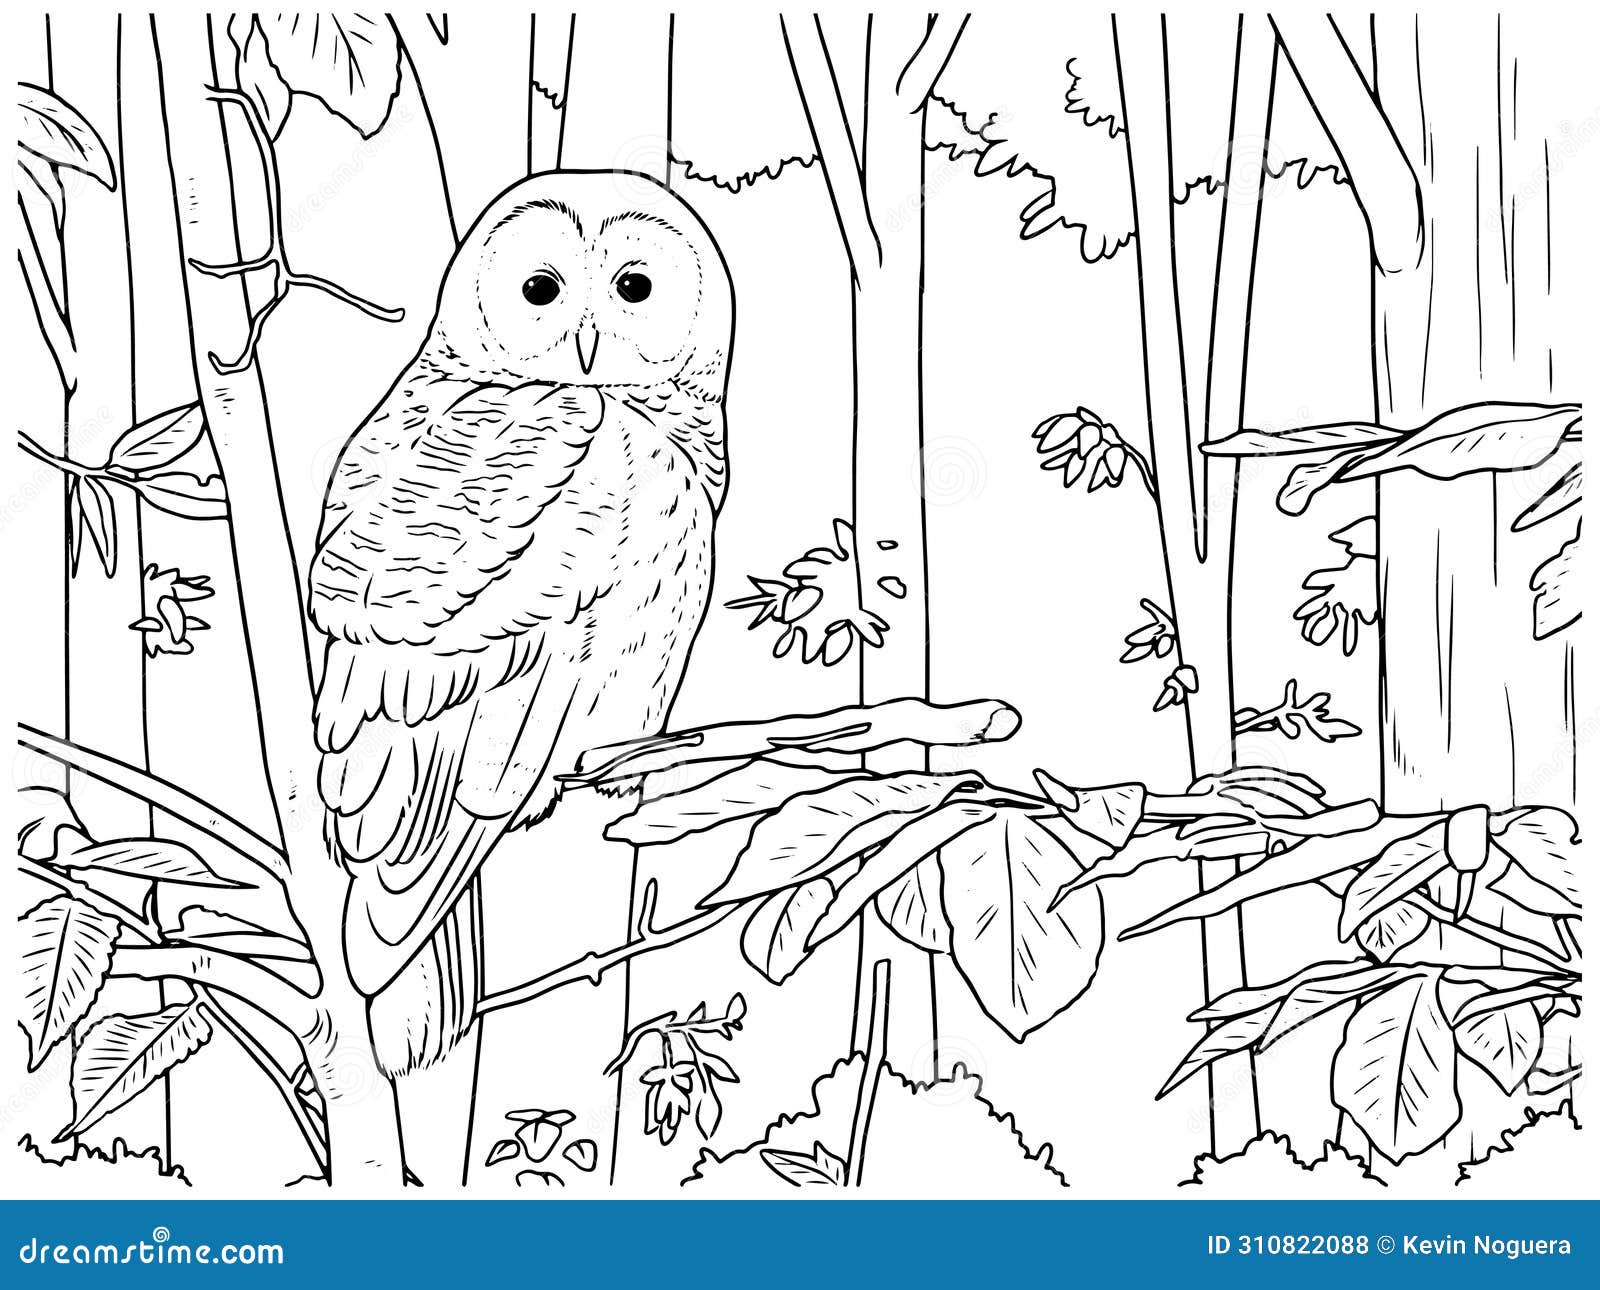  drawing of an owl in black and white